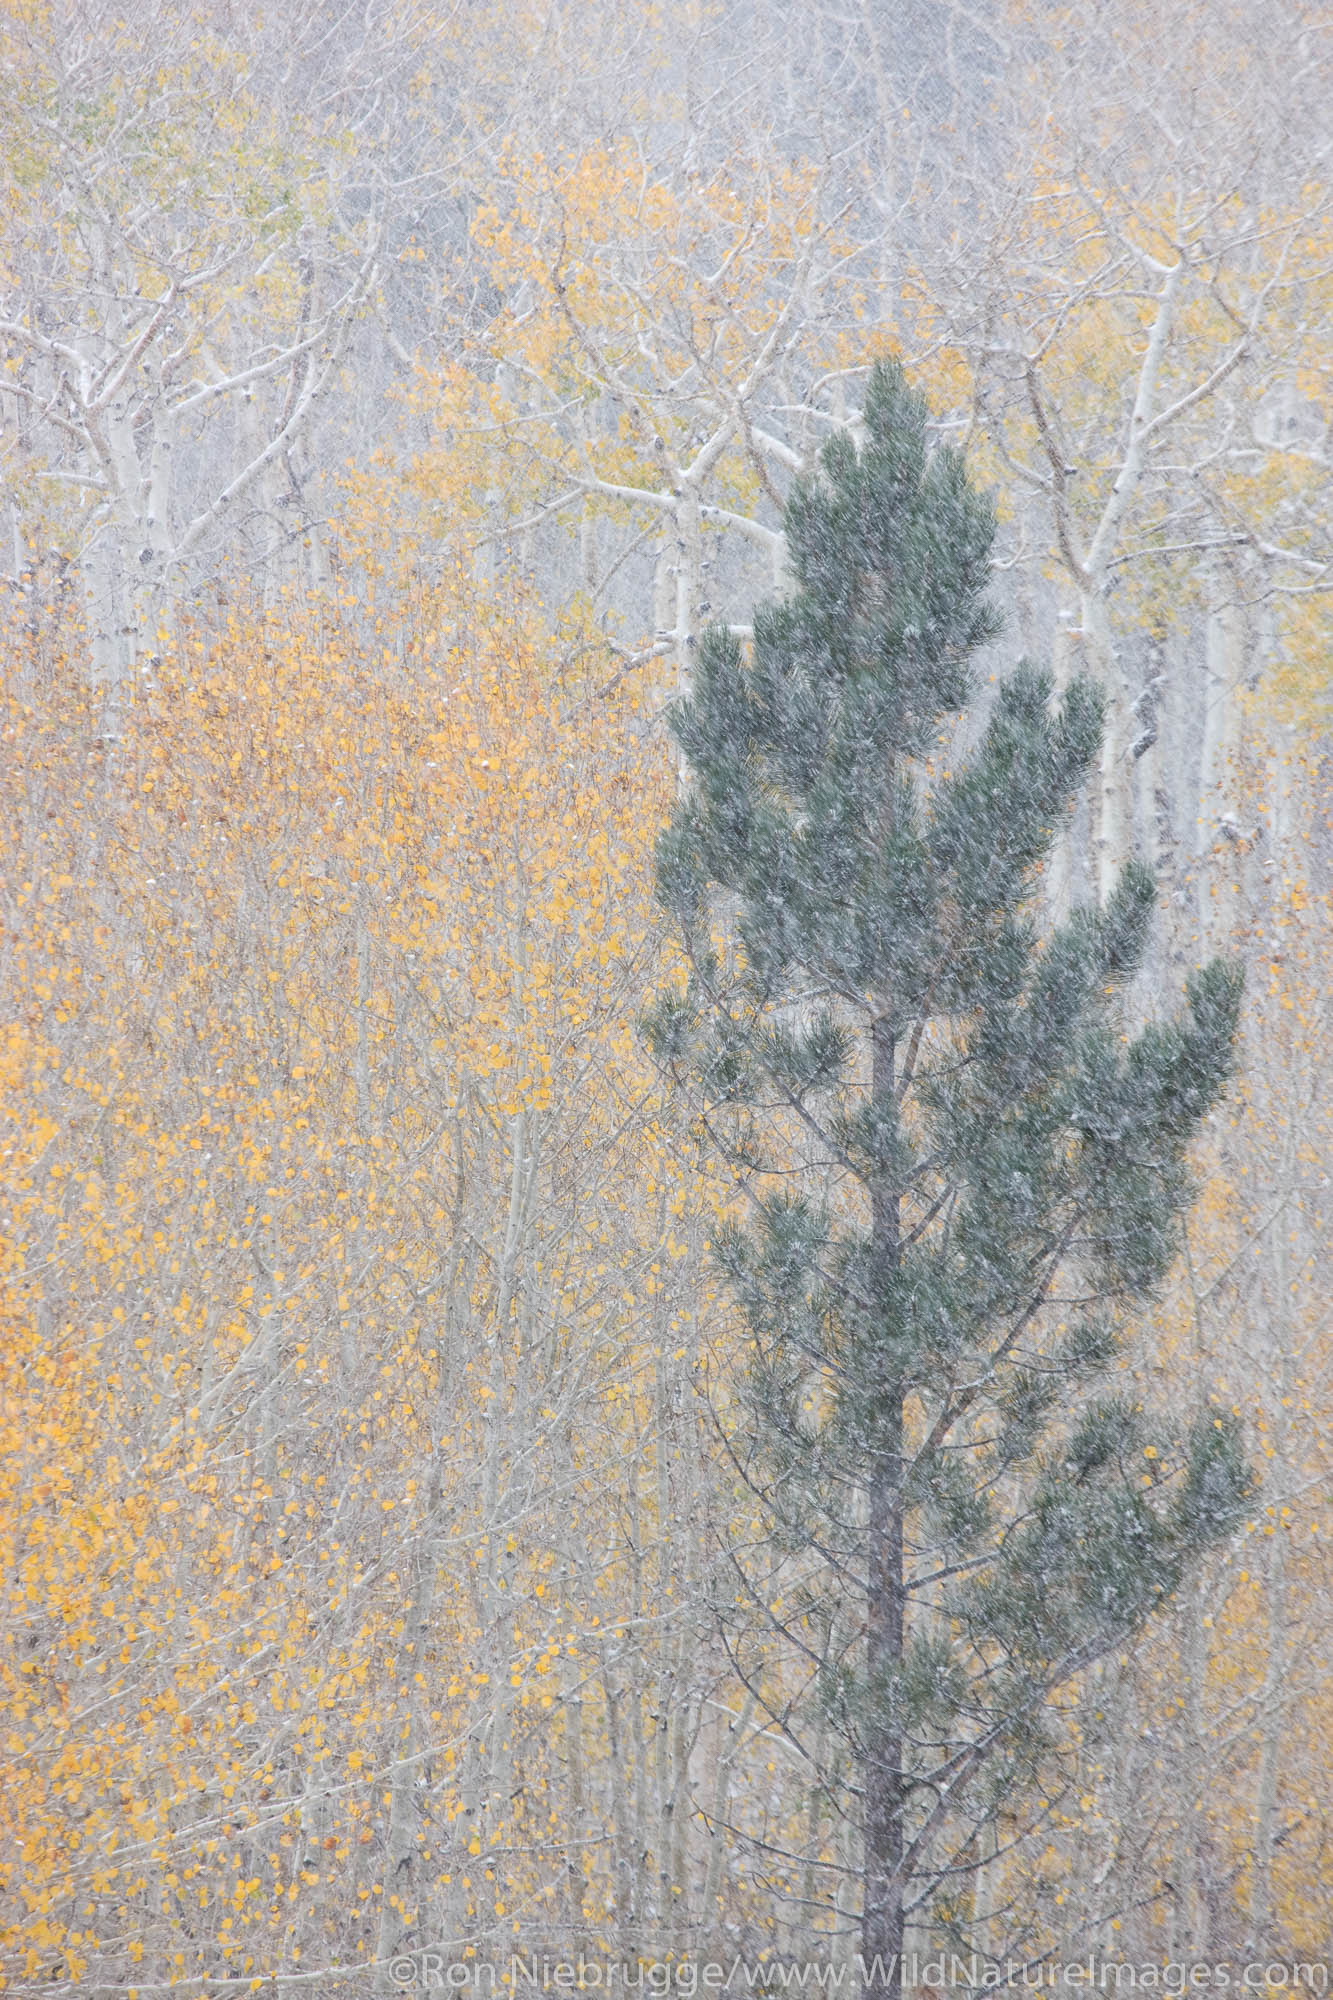 Early snow during autumn on Boulder Mountain, Dixie National Forest, Utah.